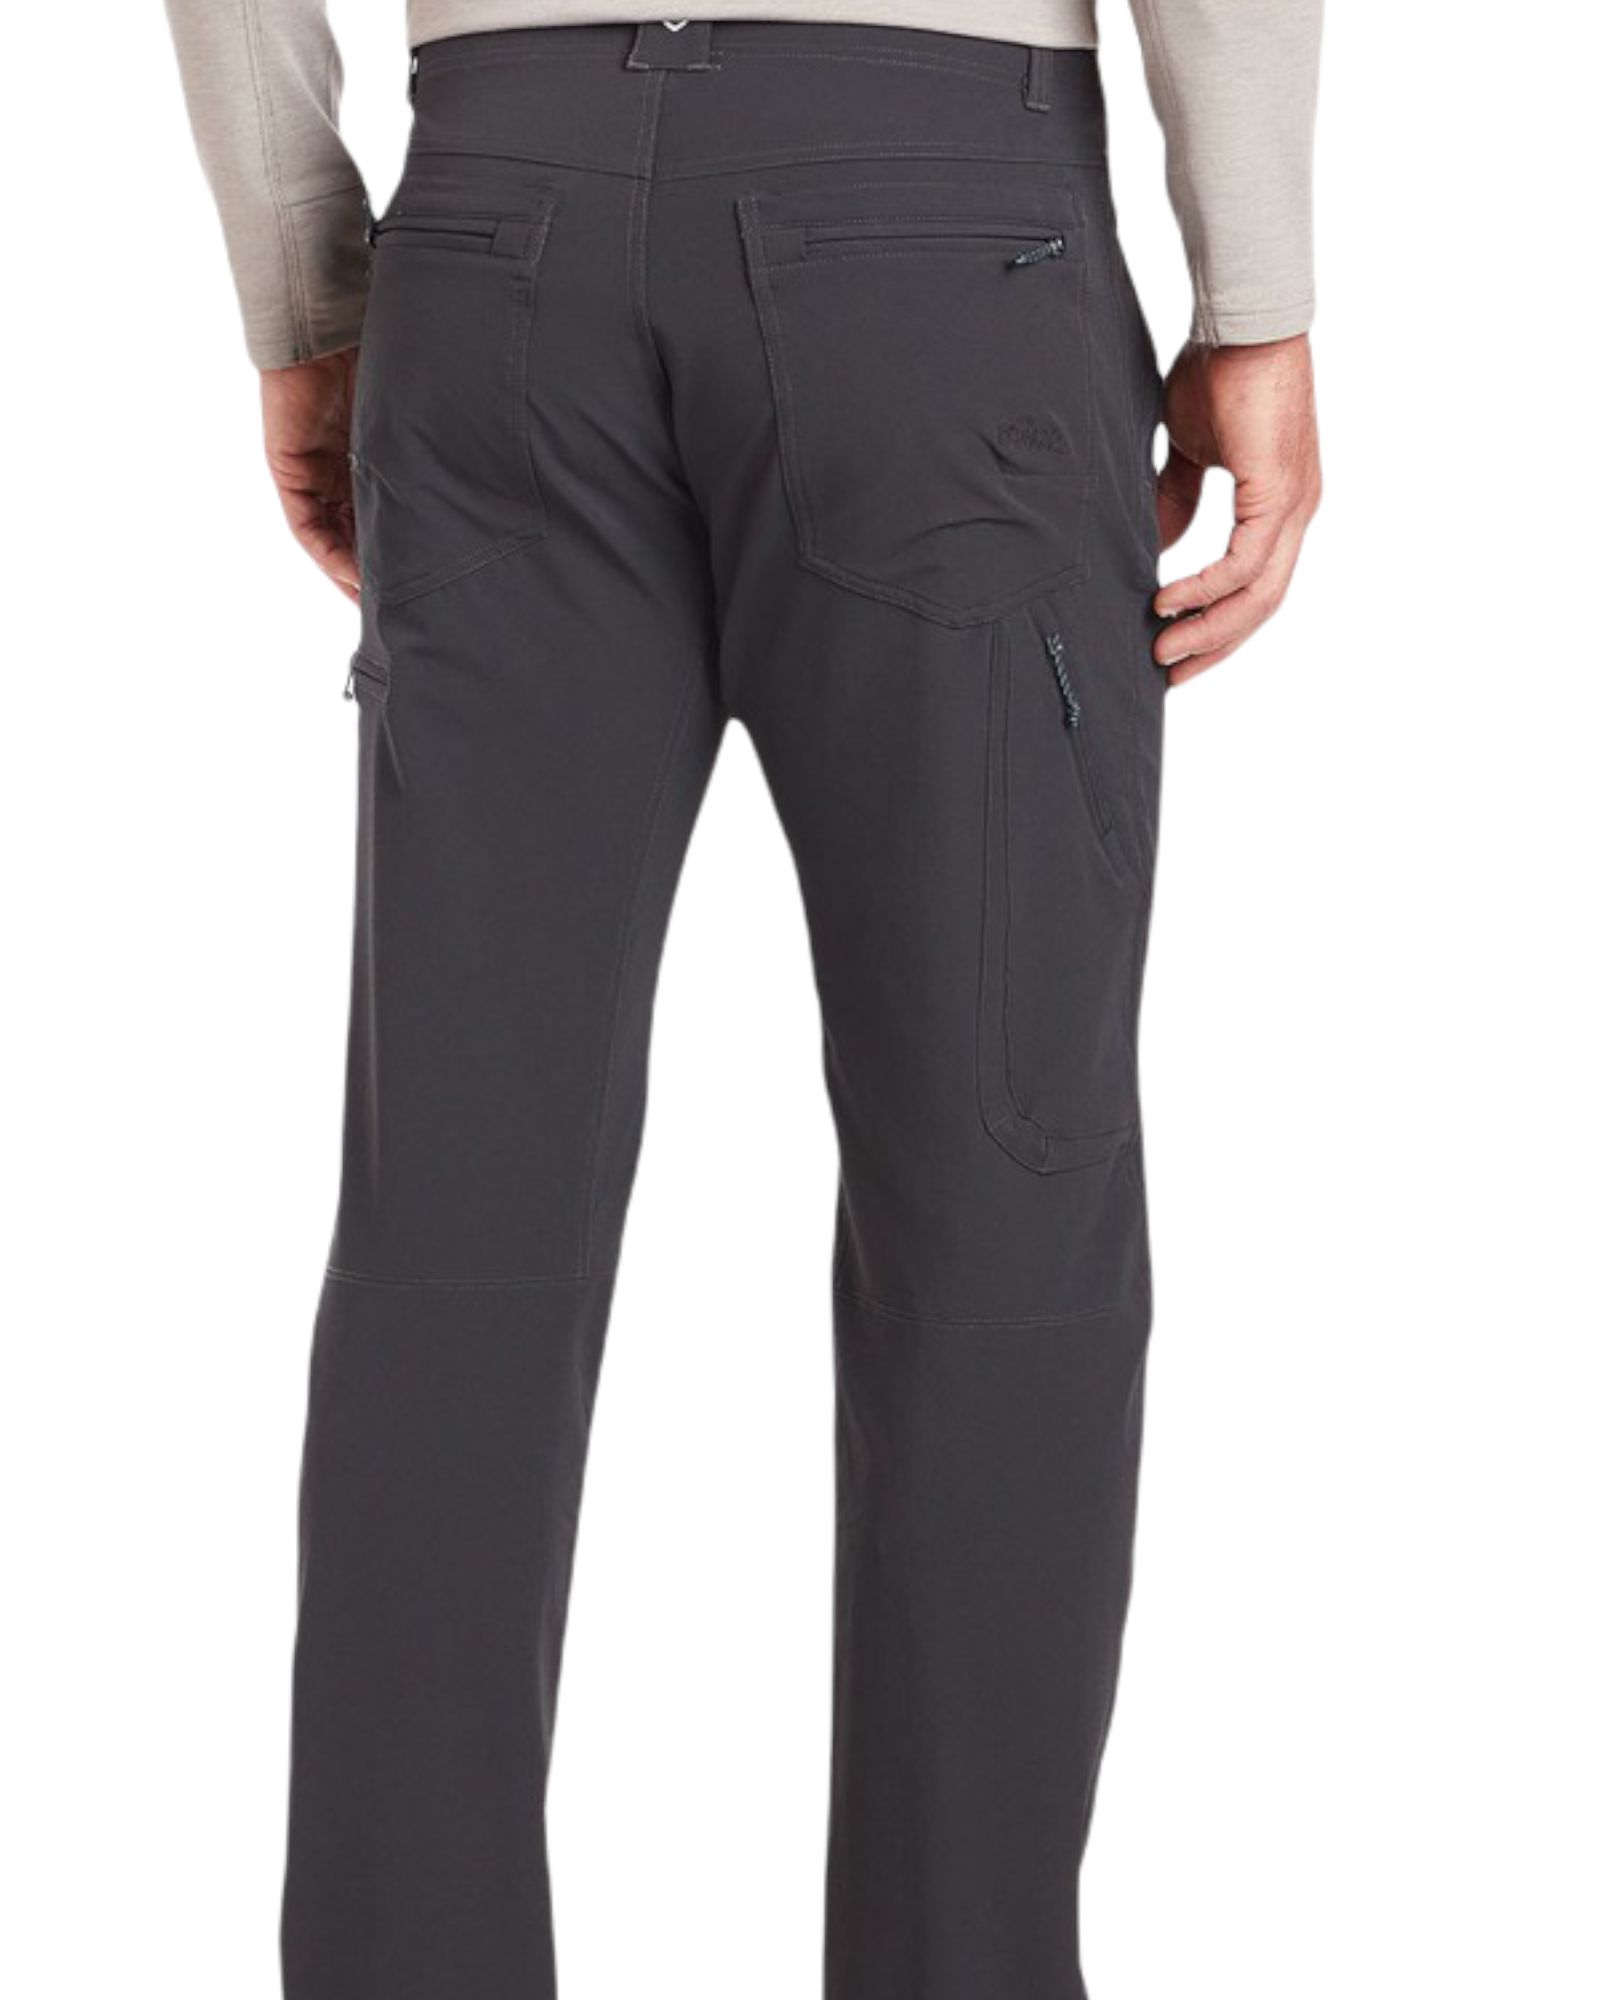 The Men’s TRANSCENDR Pant is the ideal choice for active pursuits in less than ideal conditions. 